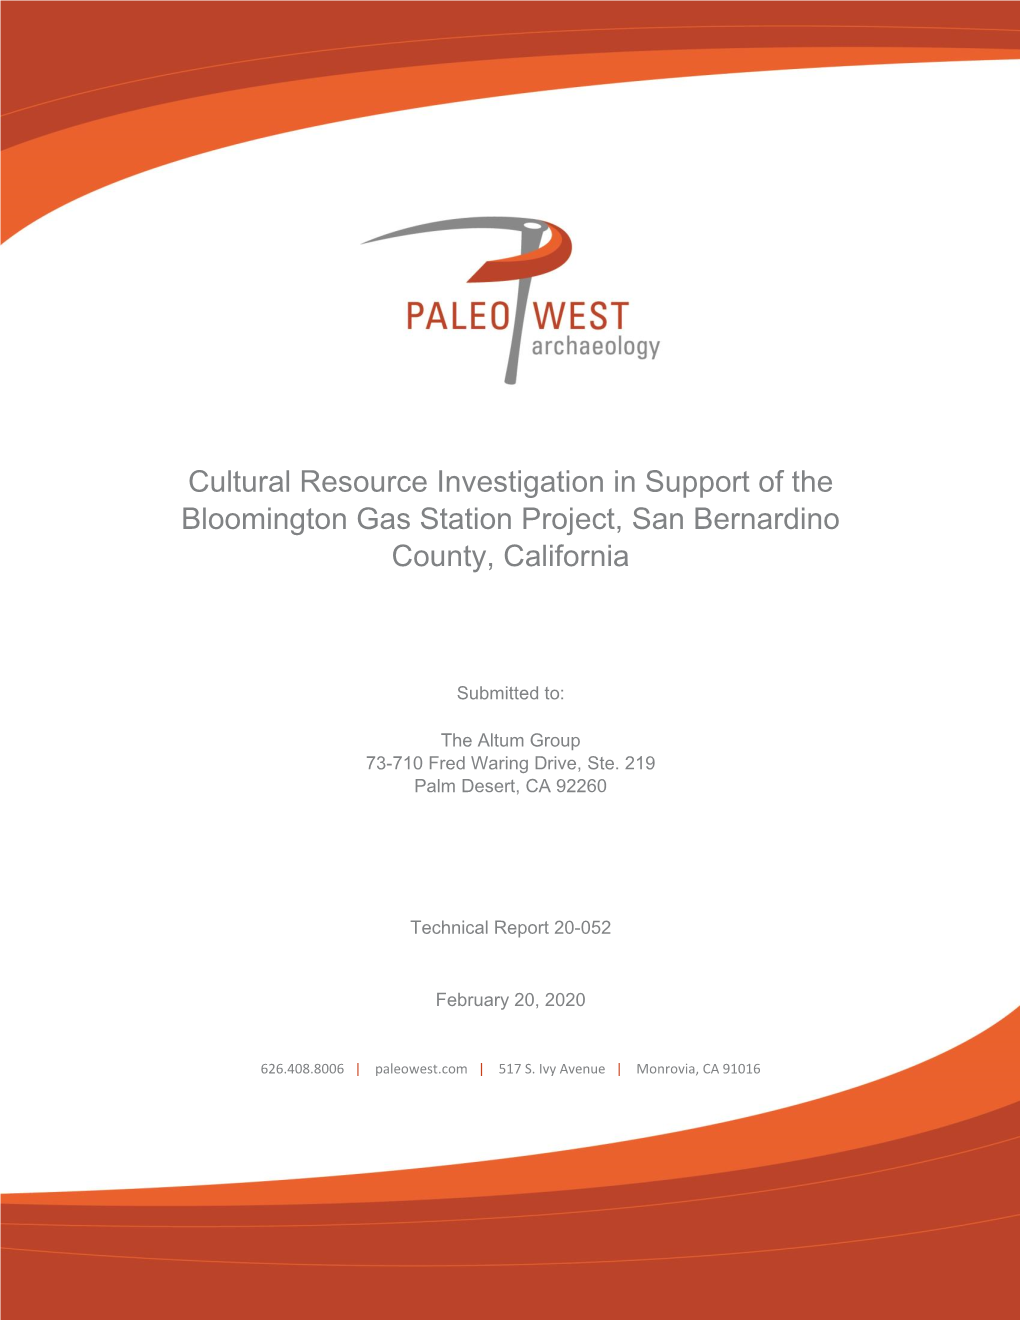 Cultural Resource Investigation in Support of the Bloomington Gas Station Project, San Bernardino County, California